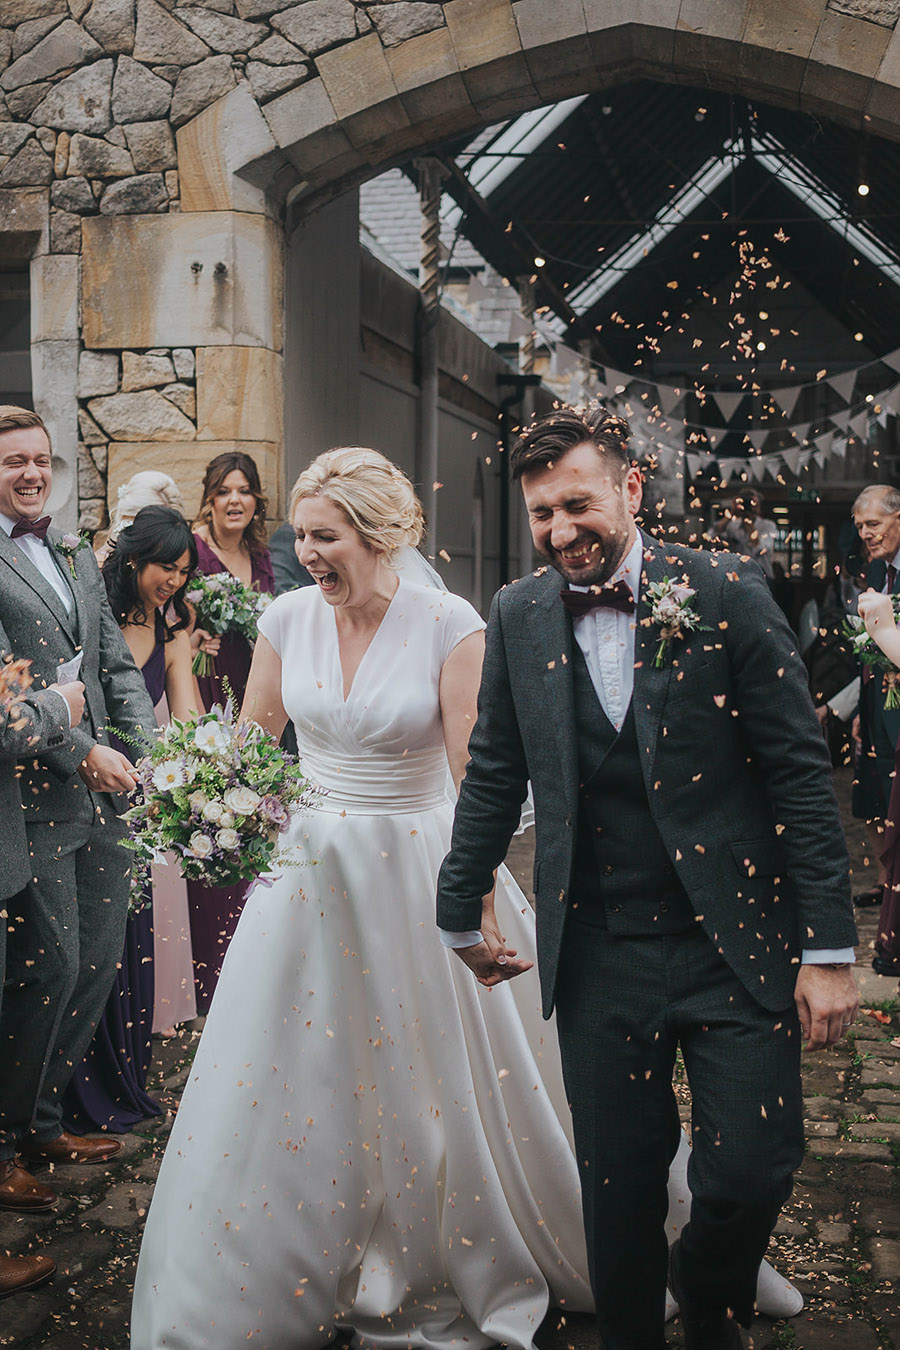 Kath & Adam’s creative, DIY wedding at Wyresdale park, with Love Gets Sweeter and Claire Basiuk Photography